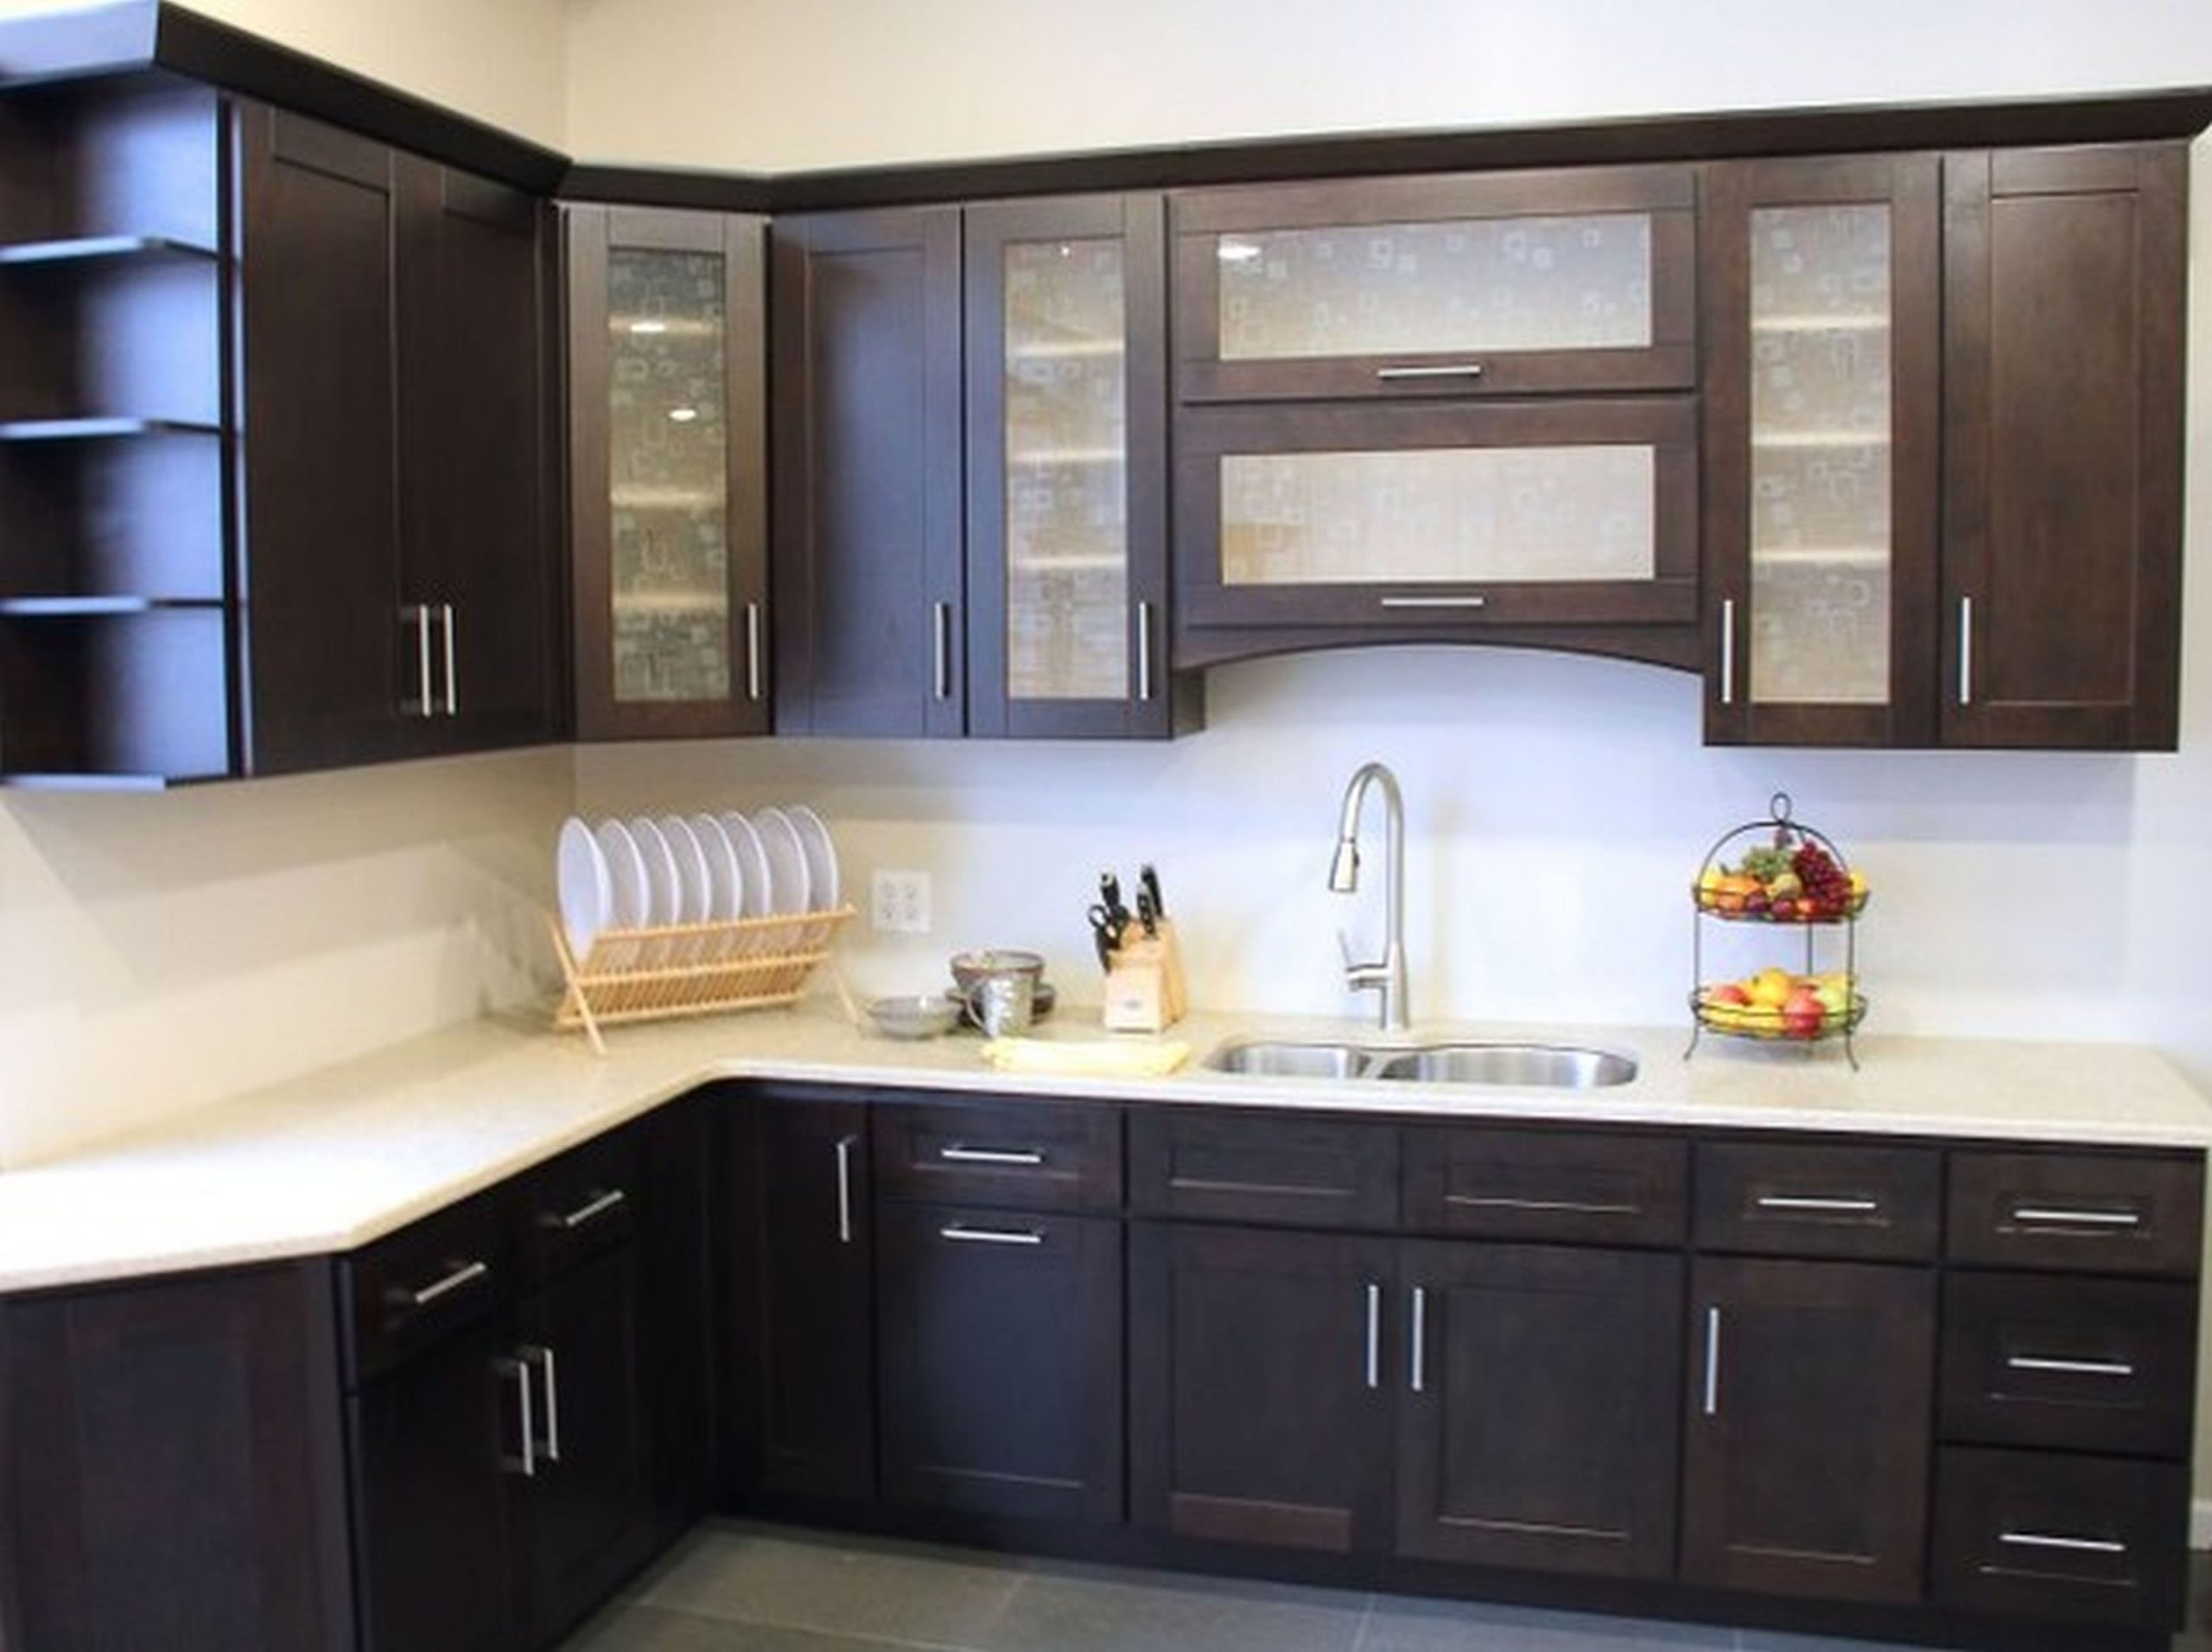 Bathroom Cabinet Designs
 Custom Kitchen Cabinets Designs for Your Lovely Kitchen